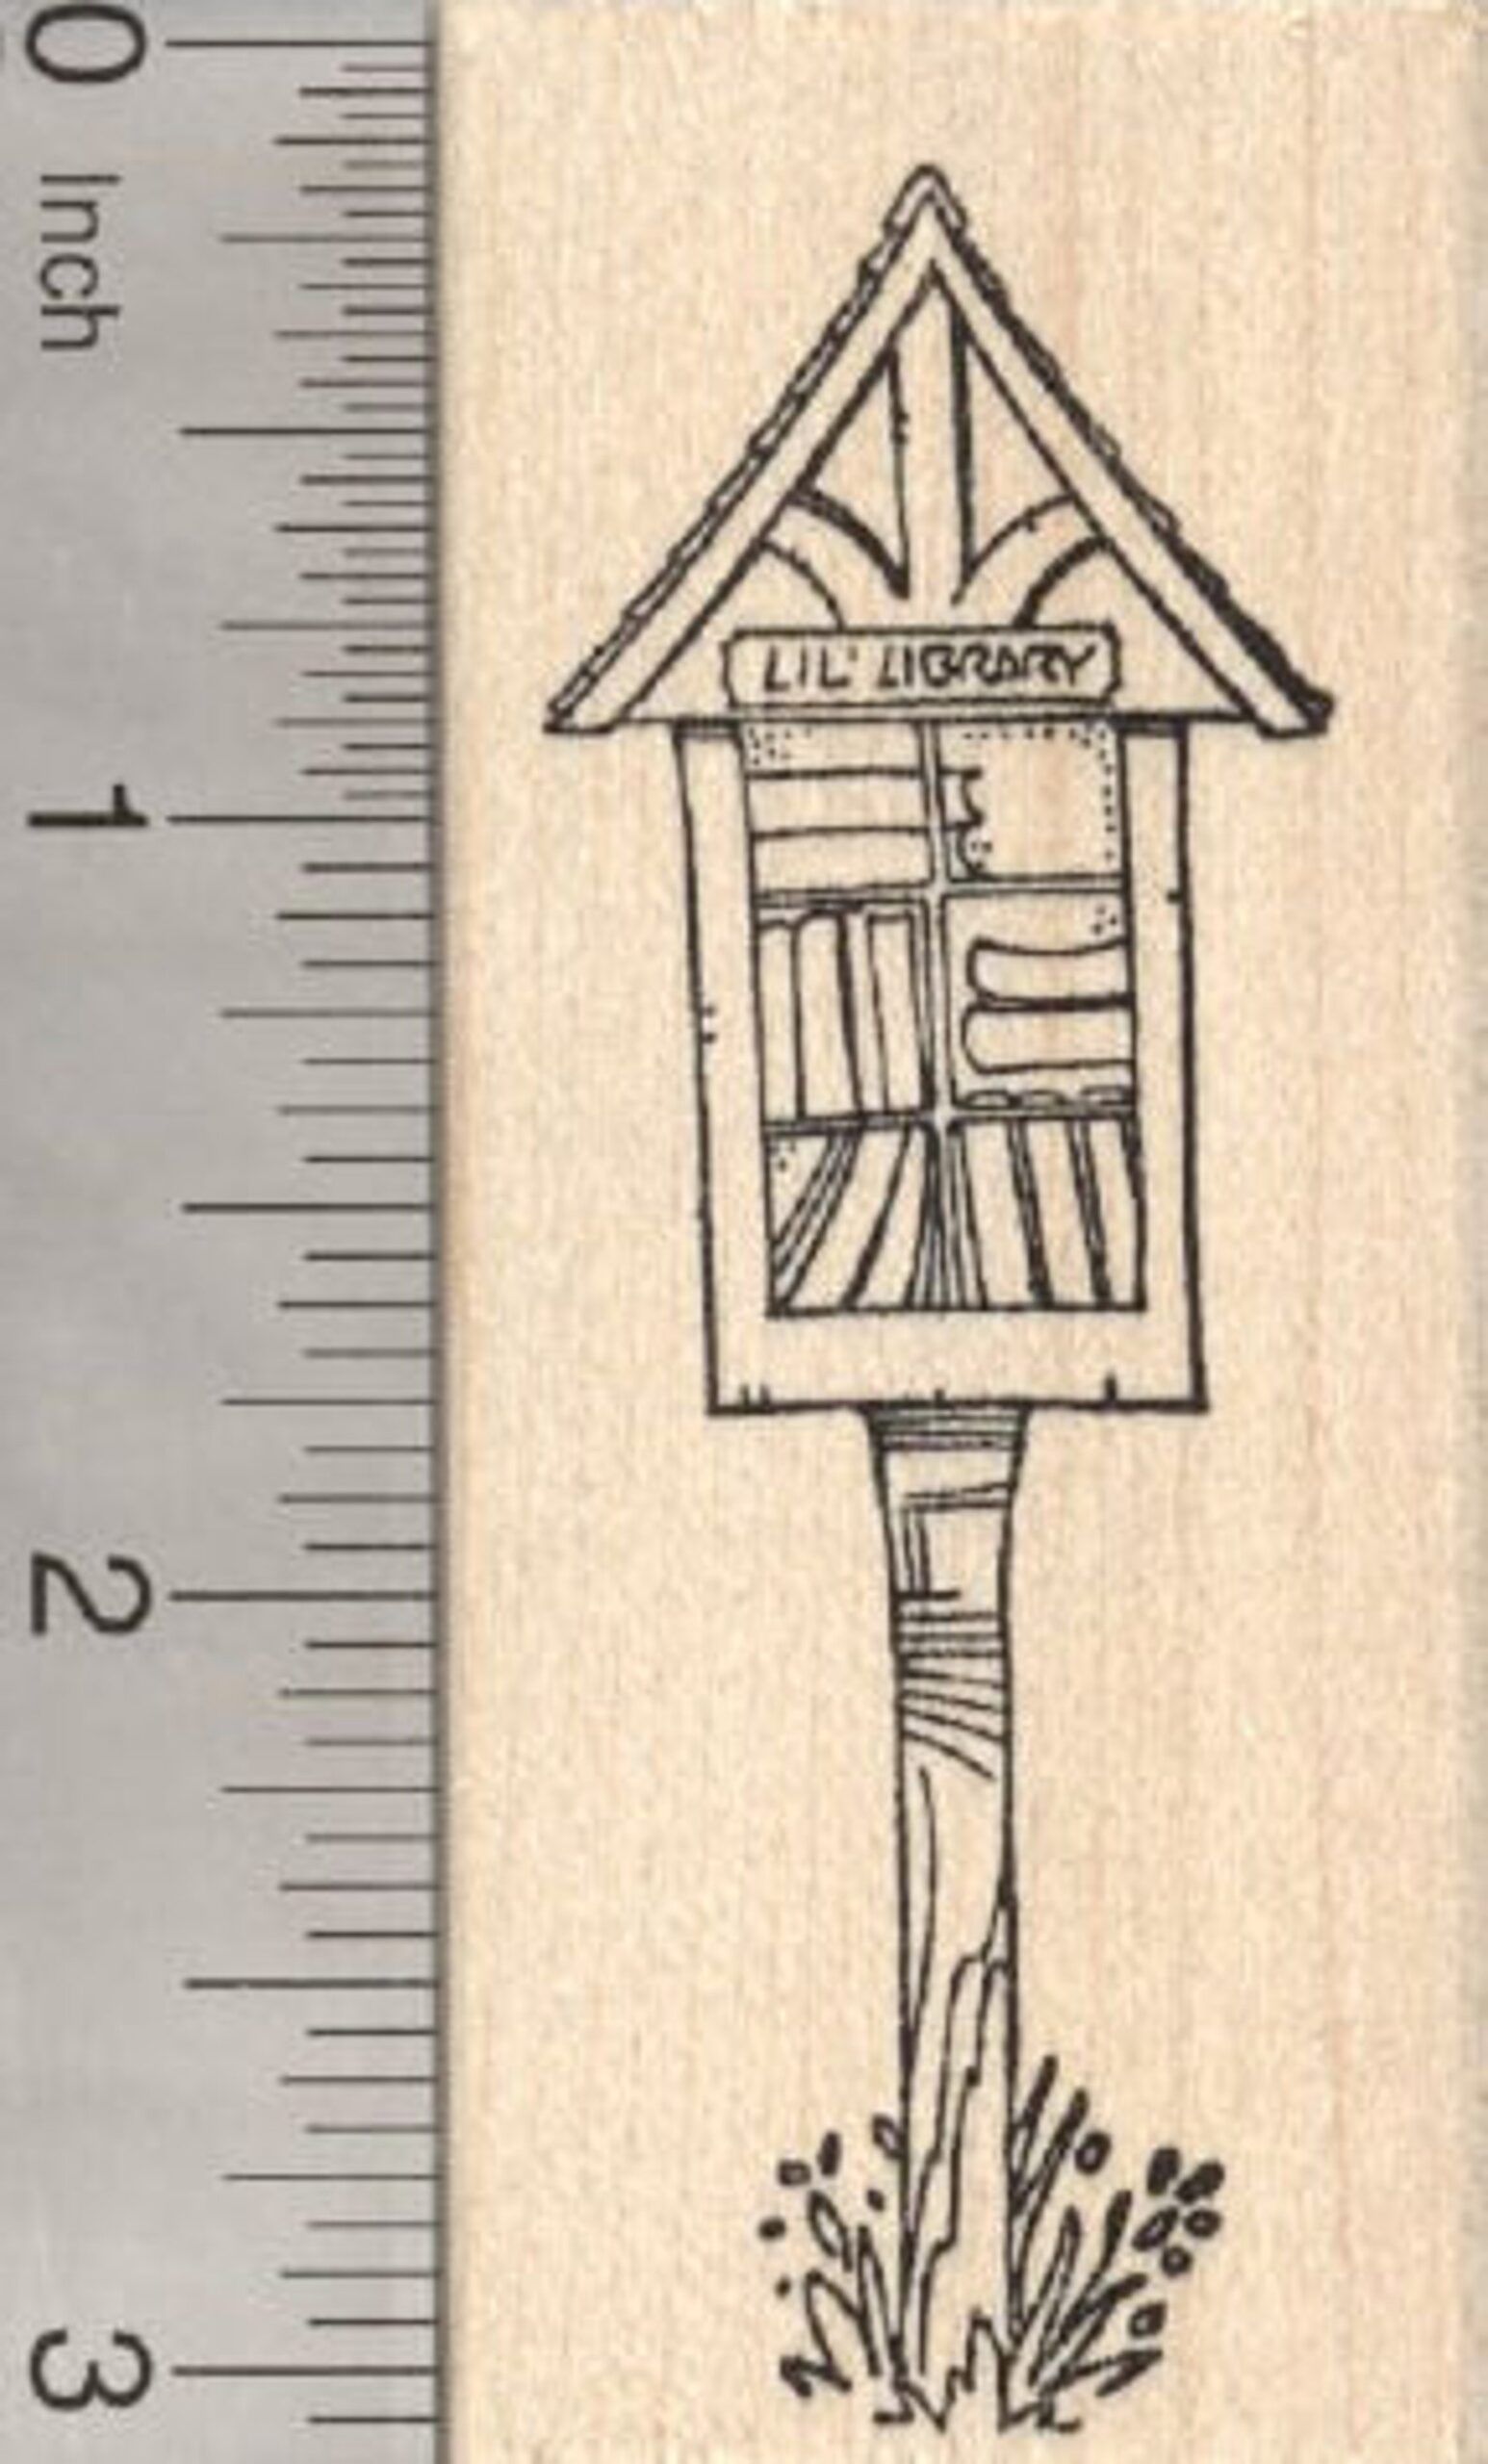 A rubber stamp depicting a LFL